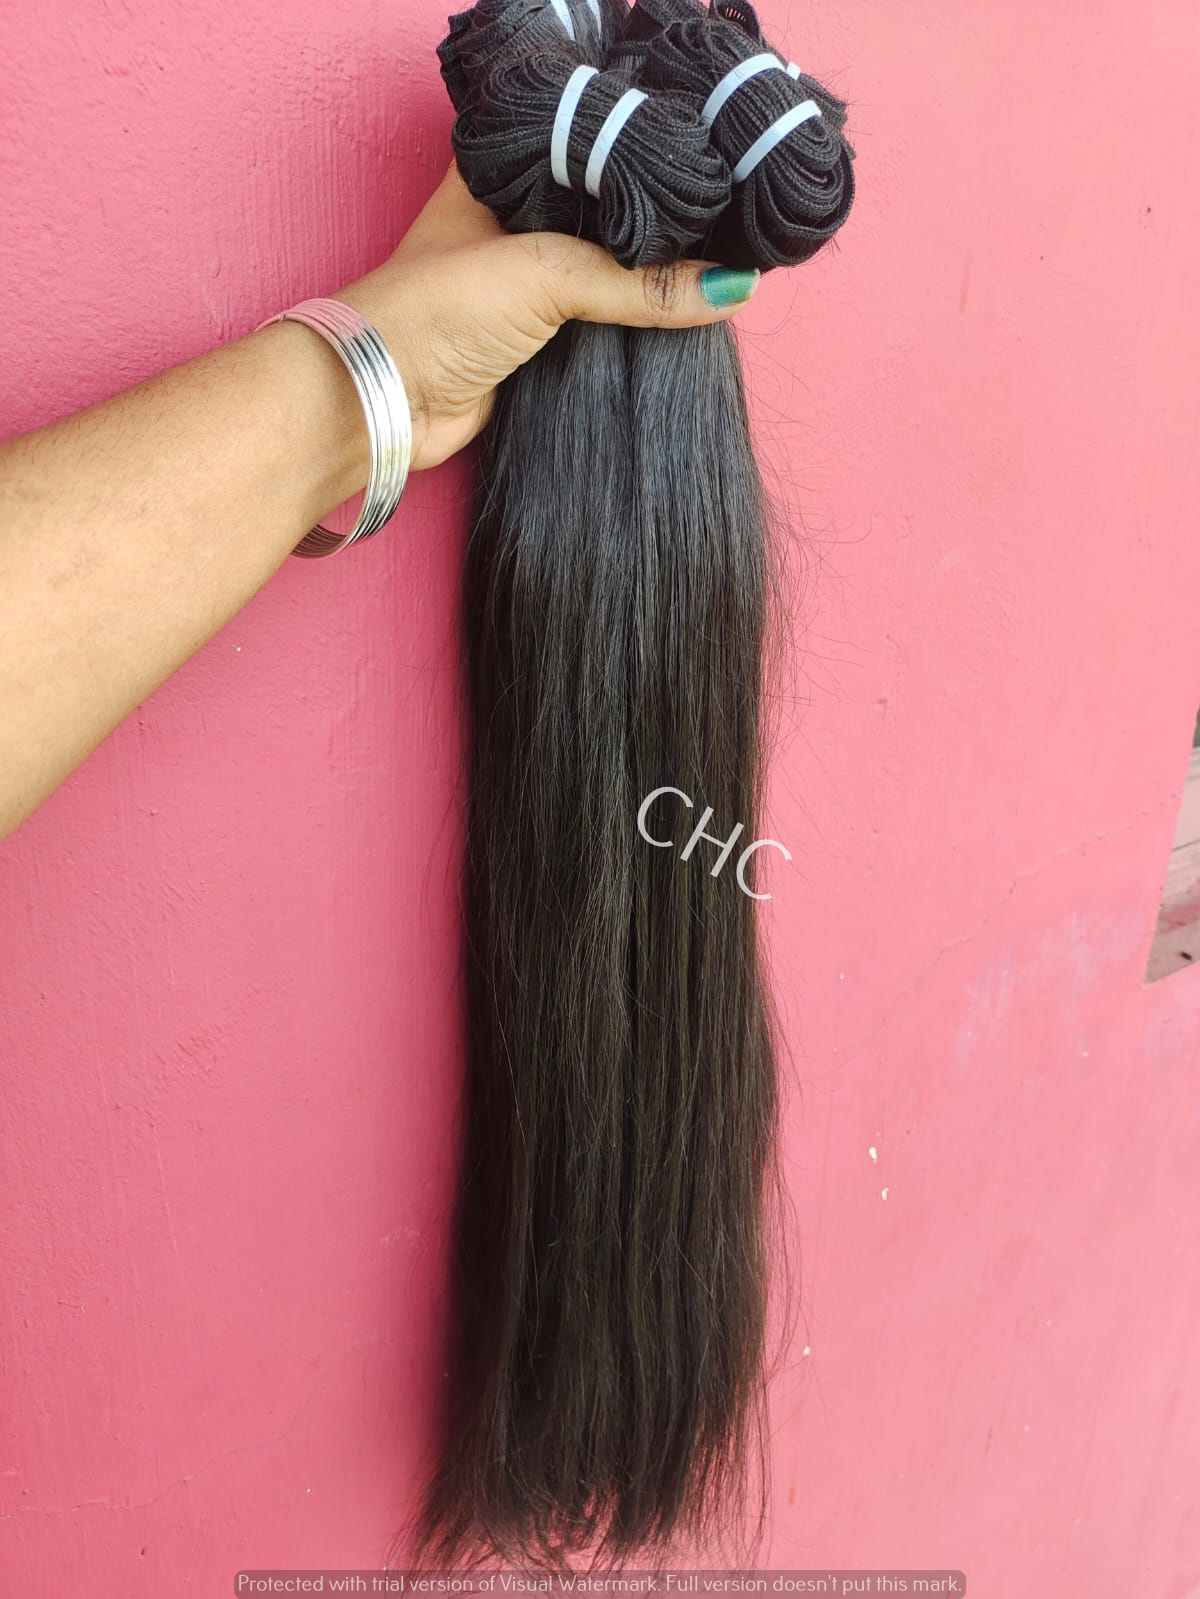 SILKY SMOOTH NATURAL STRAIGHT HAIR EXTENSIONS